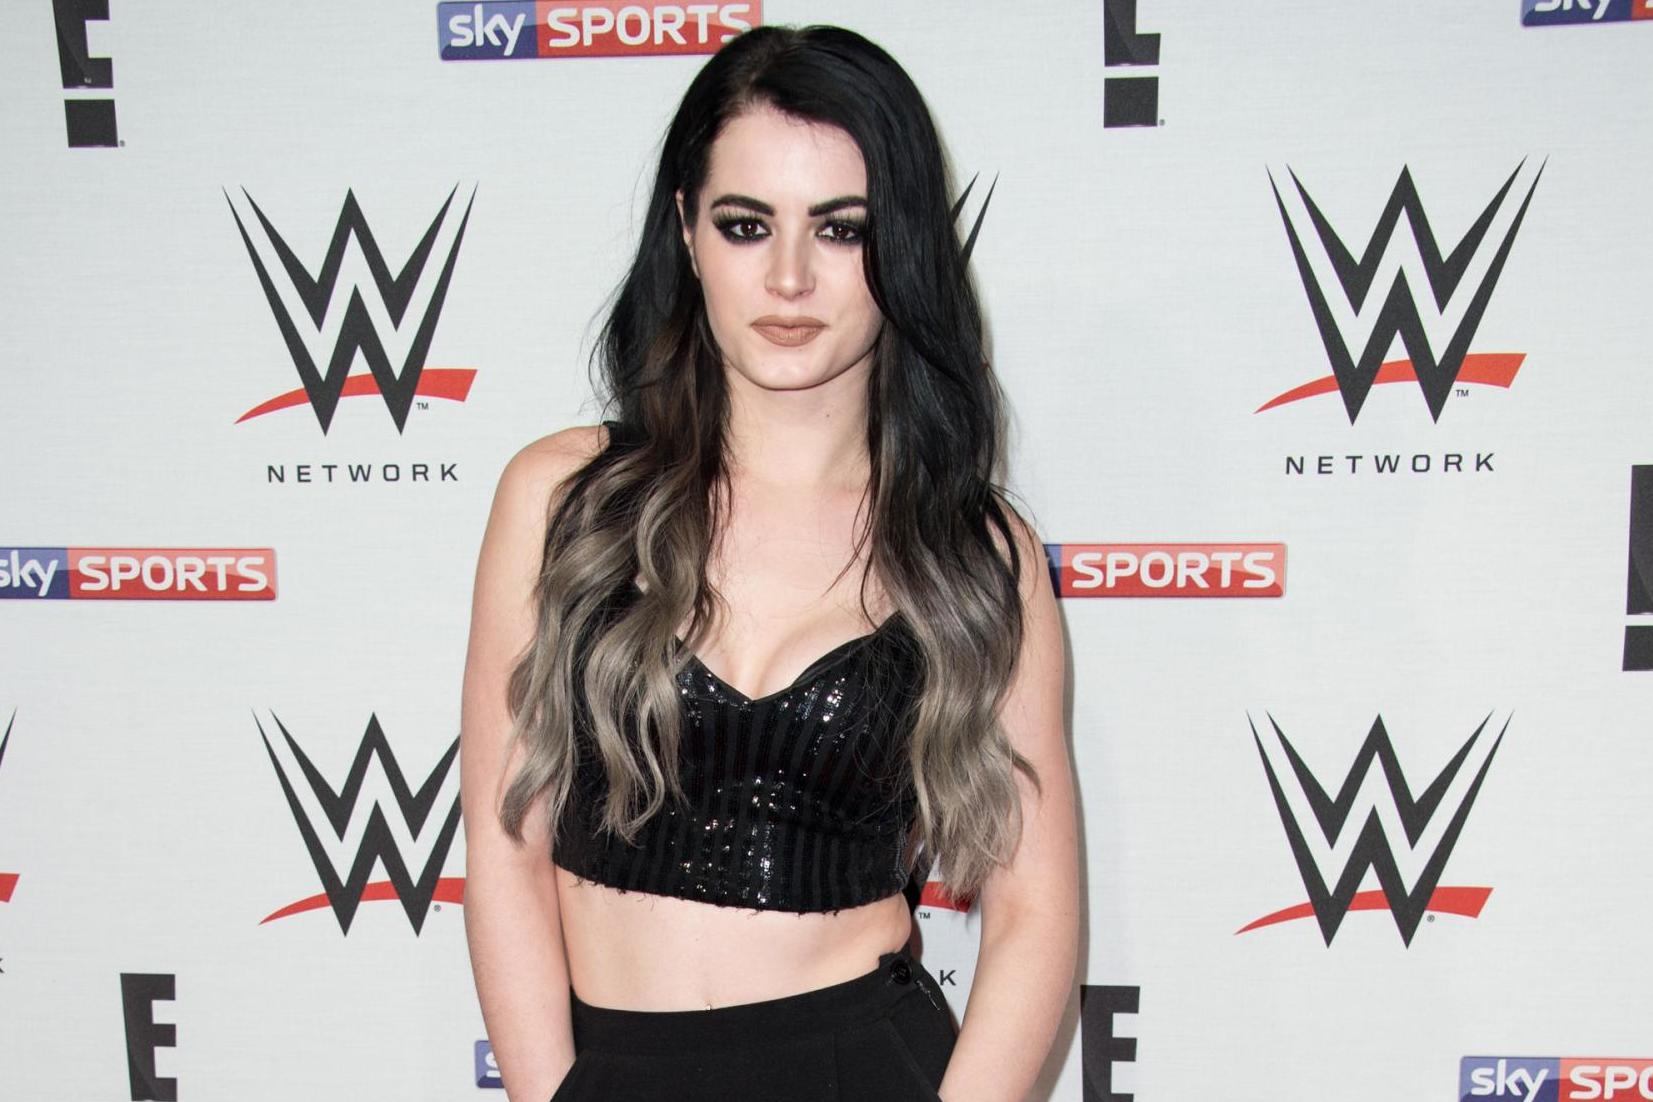 Who is Paige? Everything you need to know about the WWE star